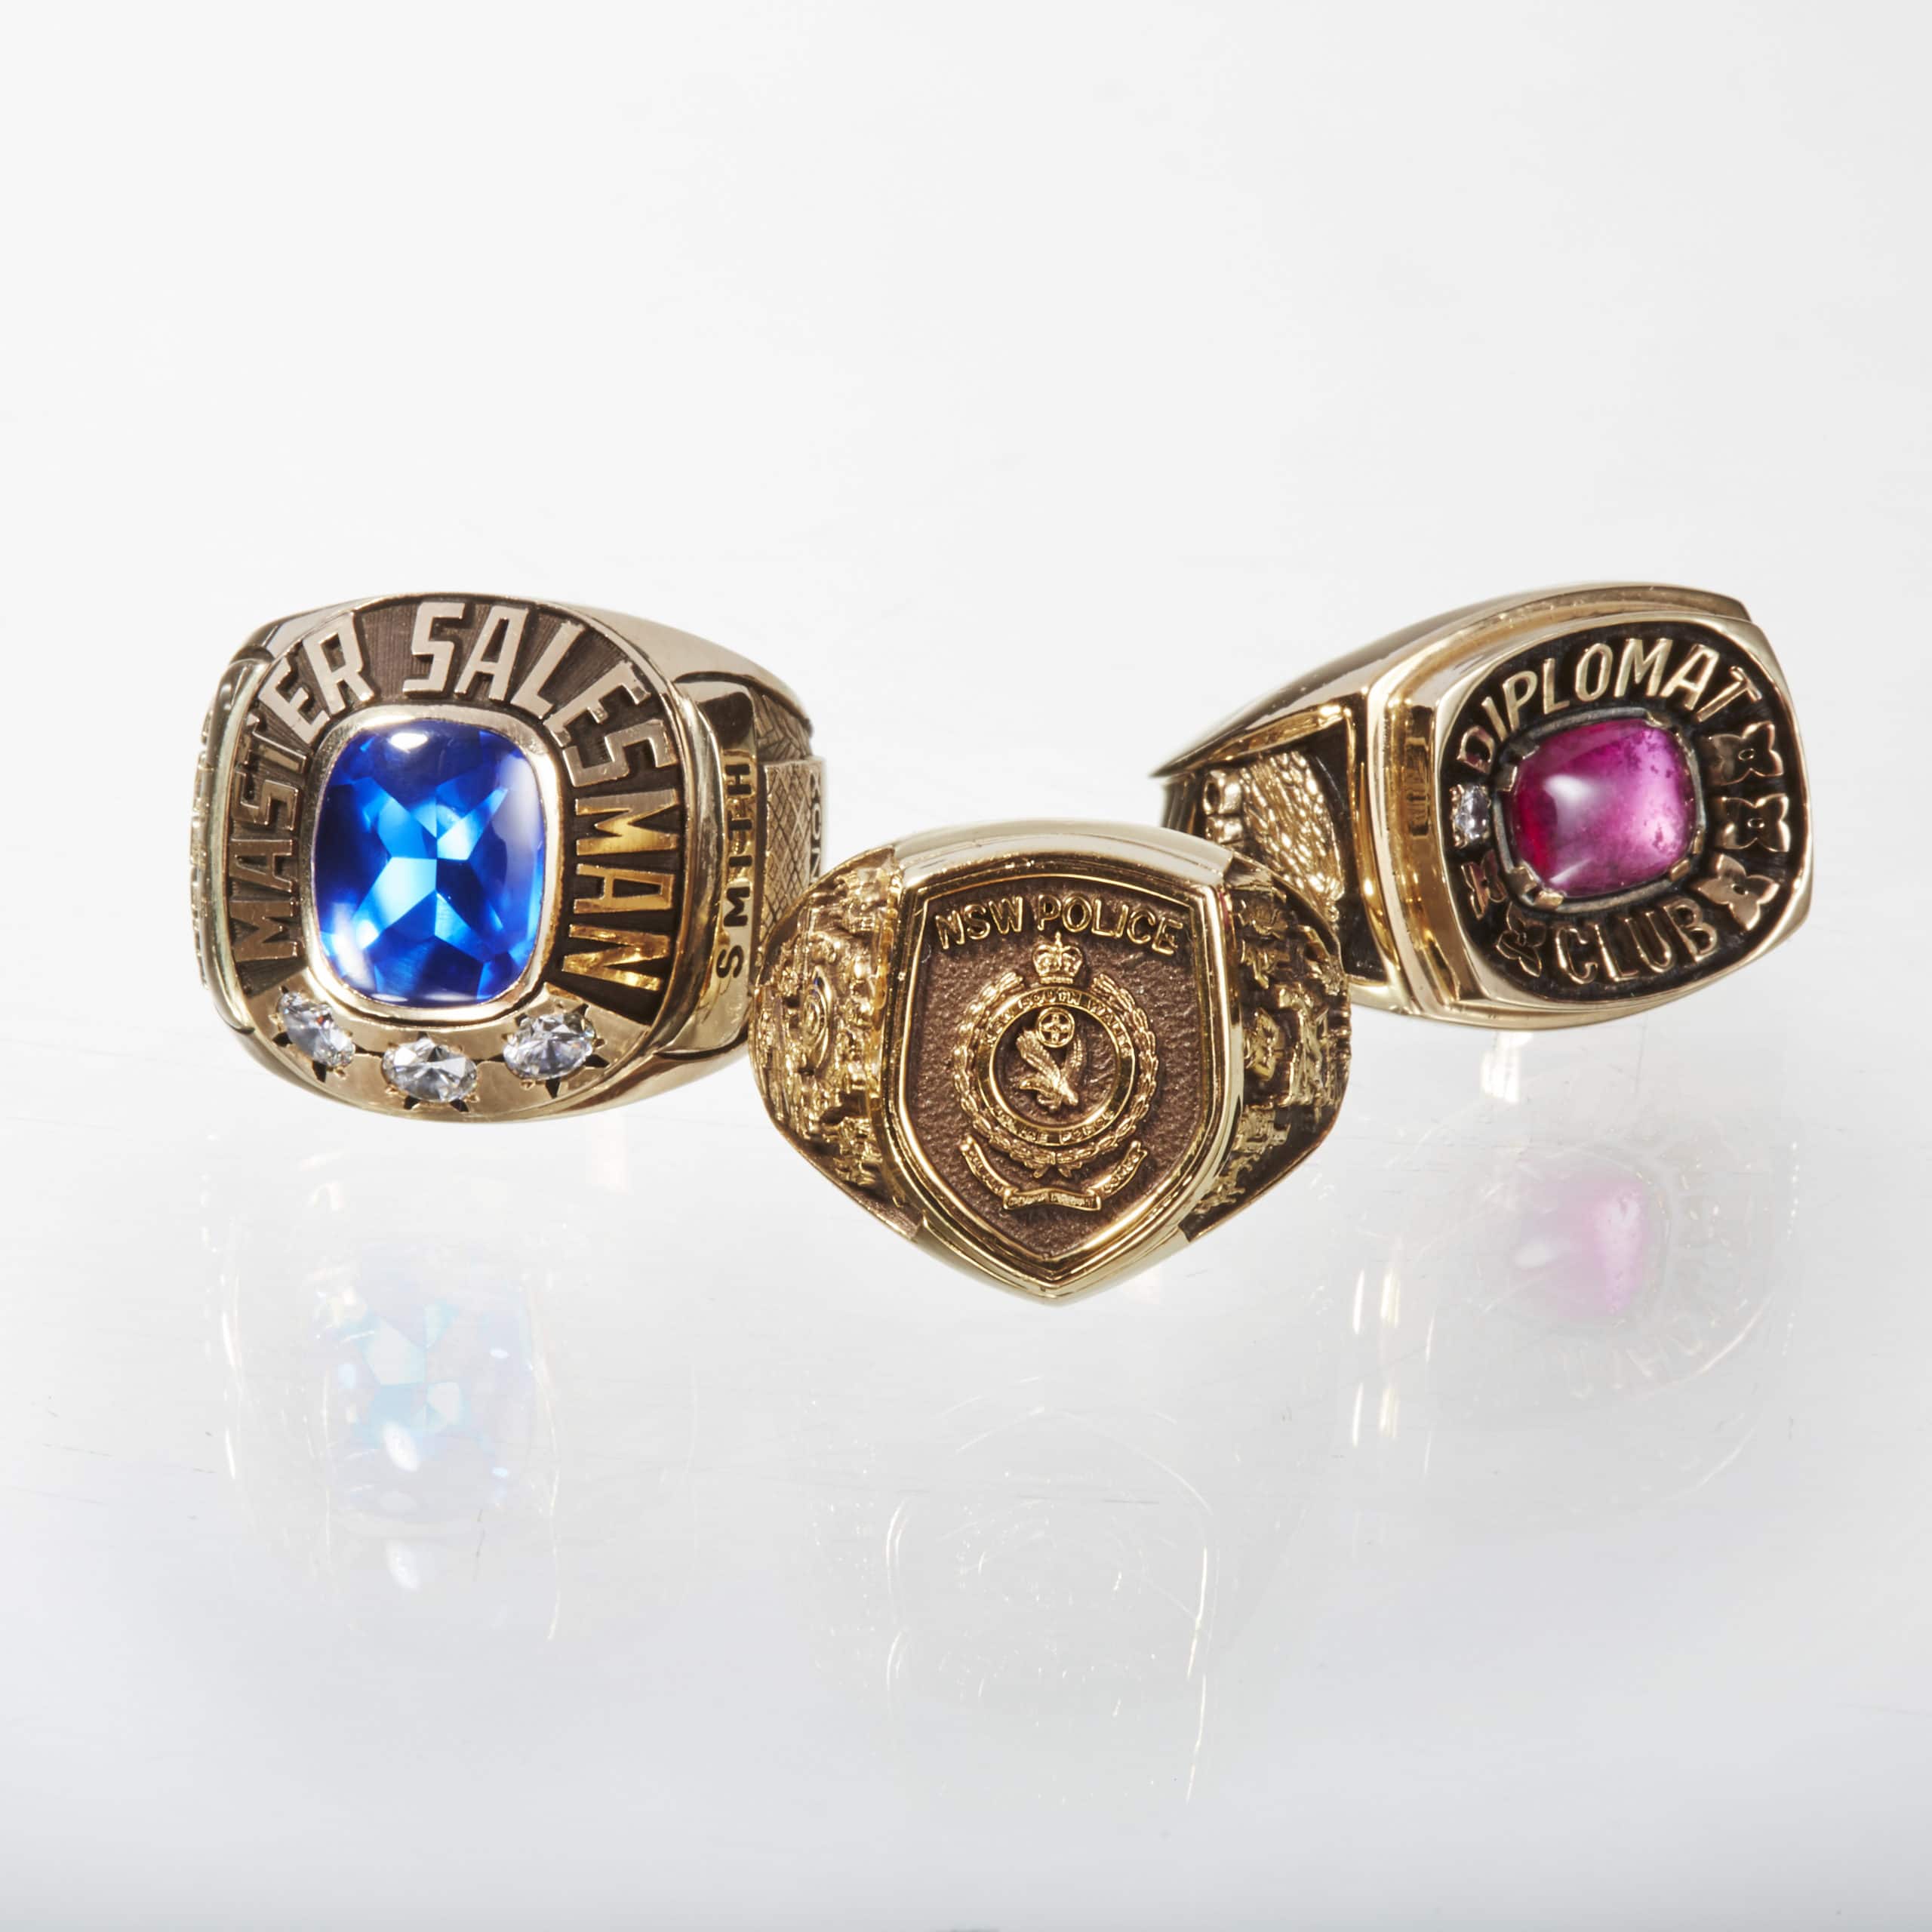 Three Class Rings with Blue and Pink Stones